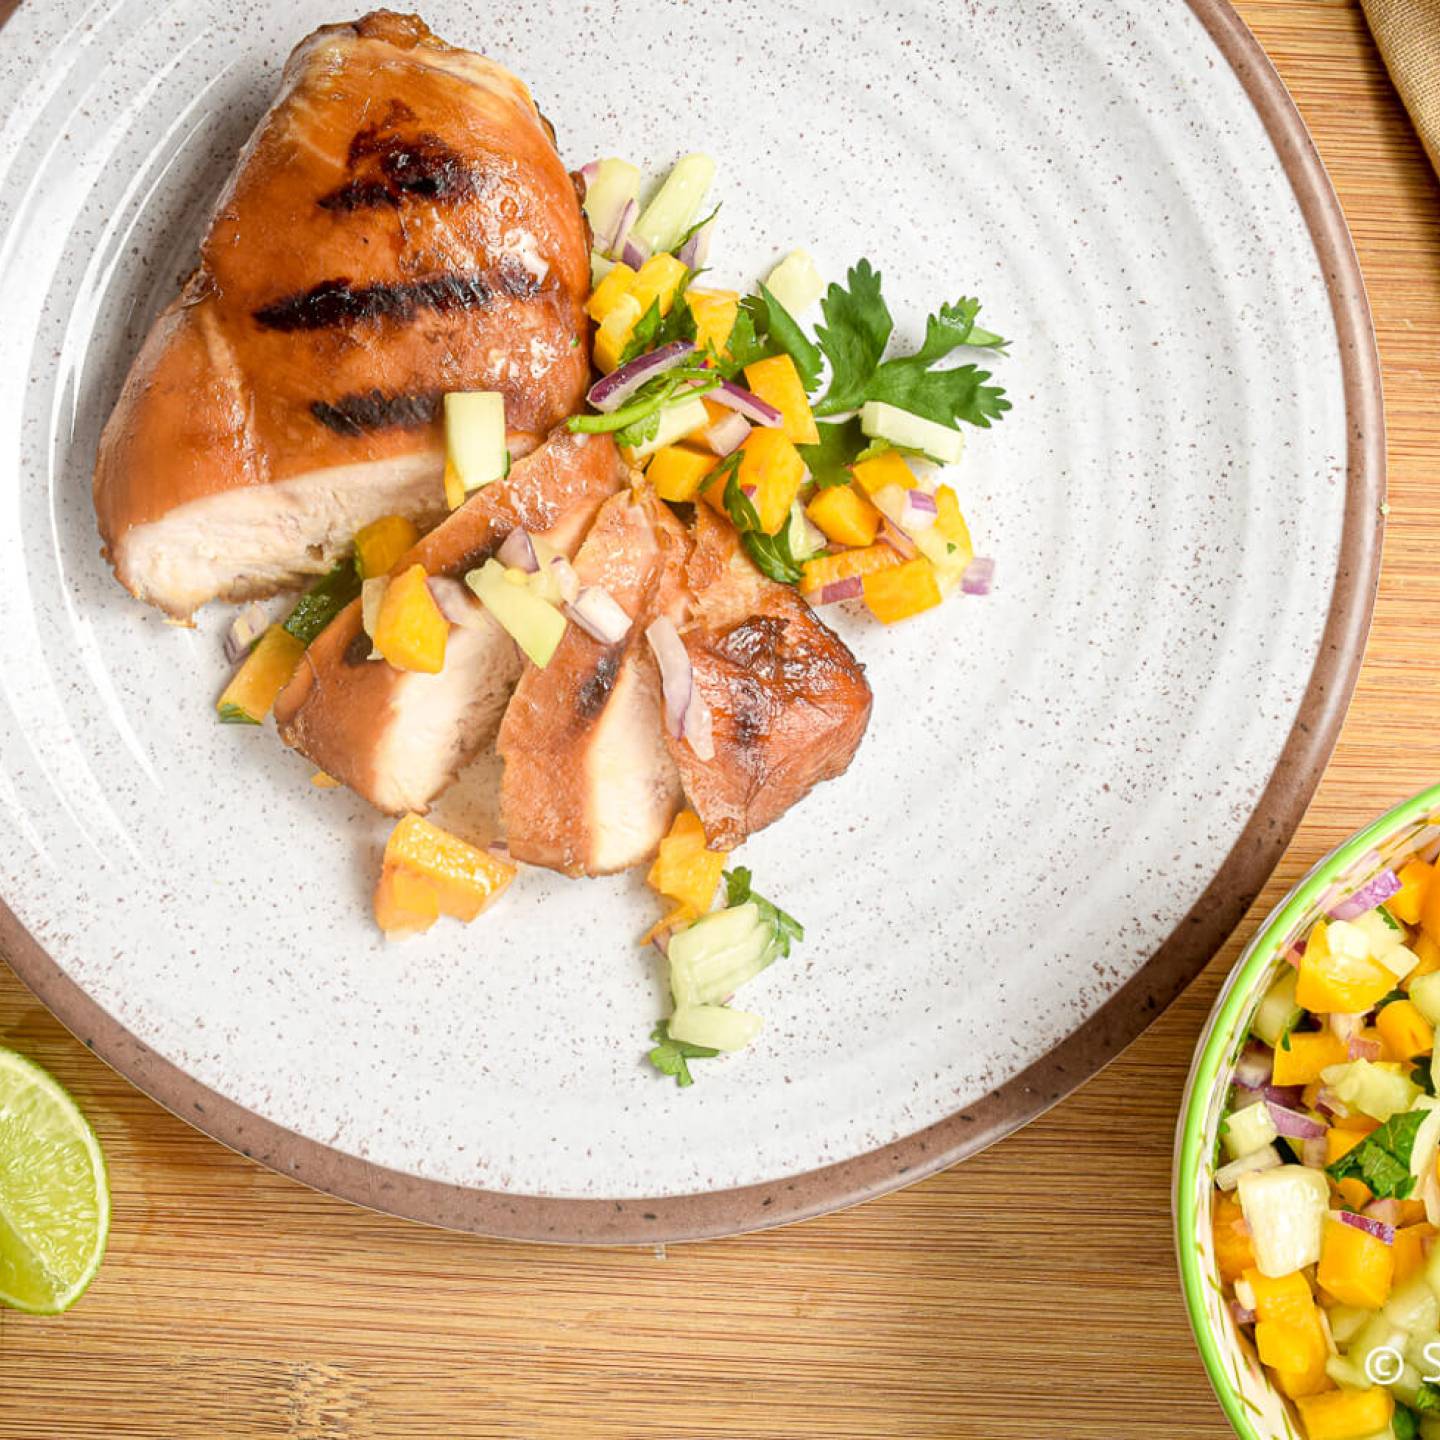 Grilled chicken with peach and cucumber salsa sliced on a plate.